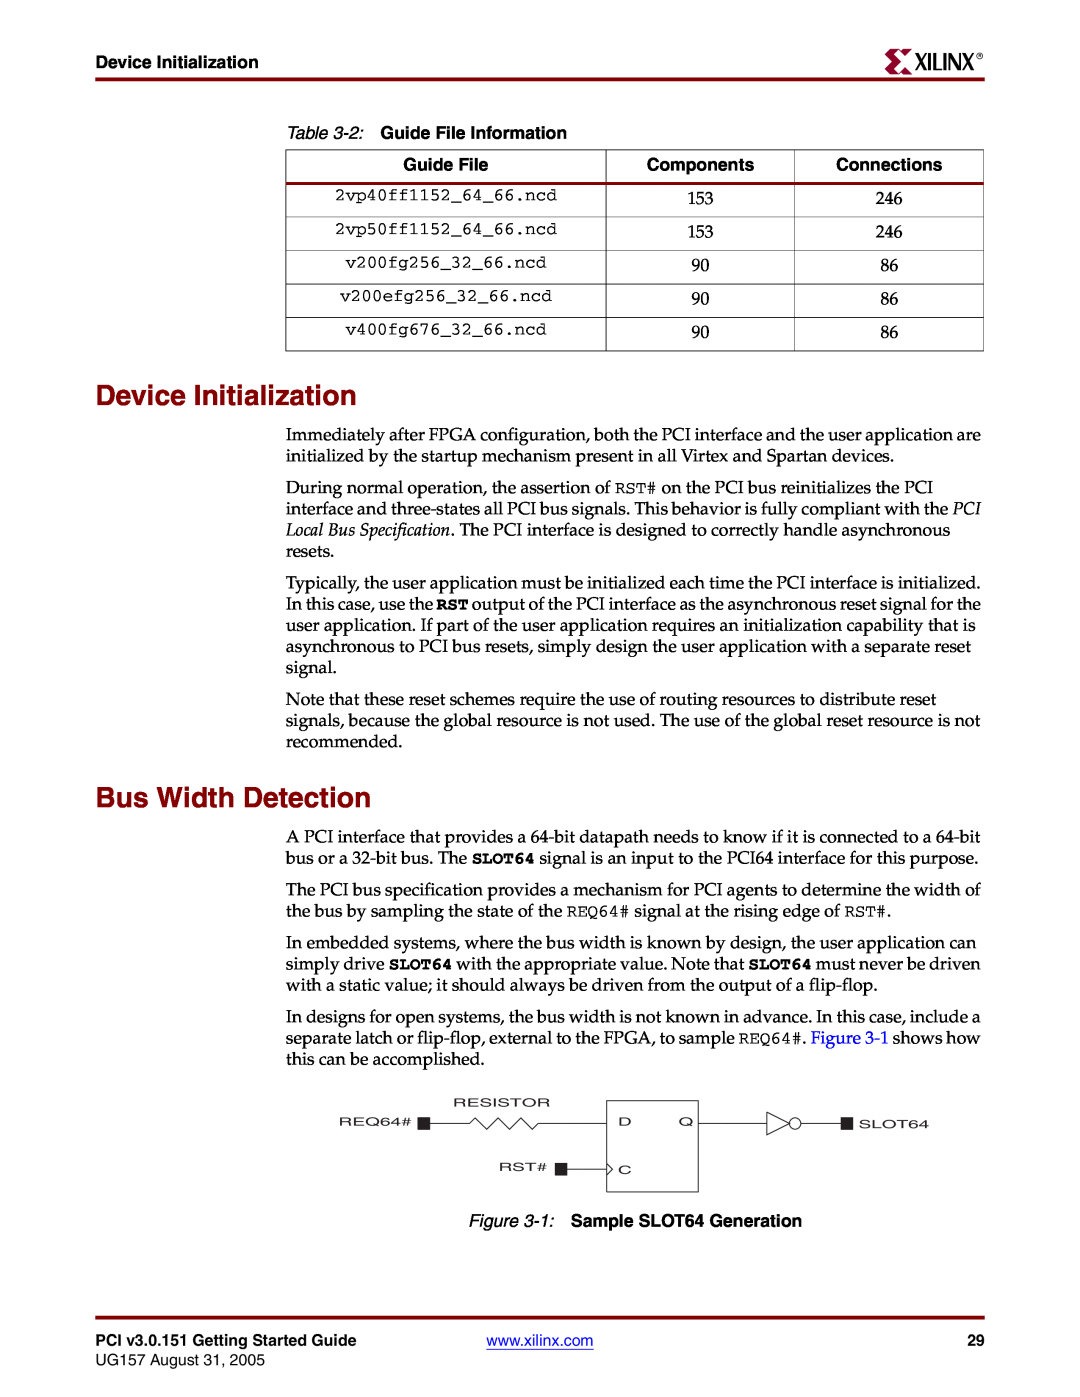 Xilinx PCI v3.0 manual Bus Width Detection, Device Initialization -2 Guide File Information, 1 Sample SLOT64 Generation 